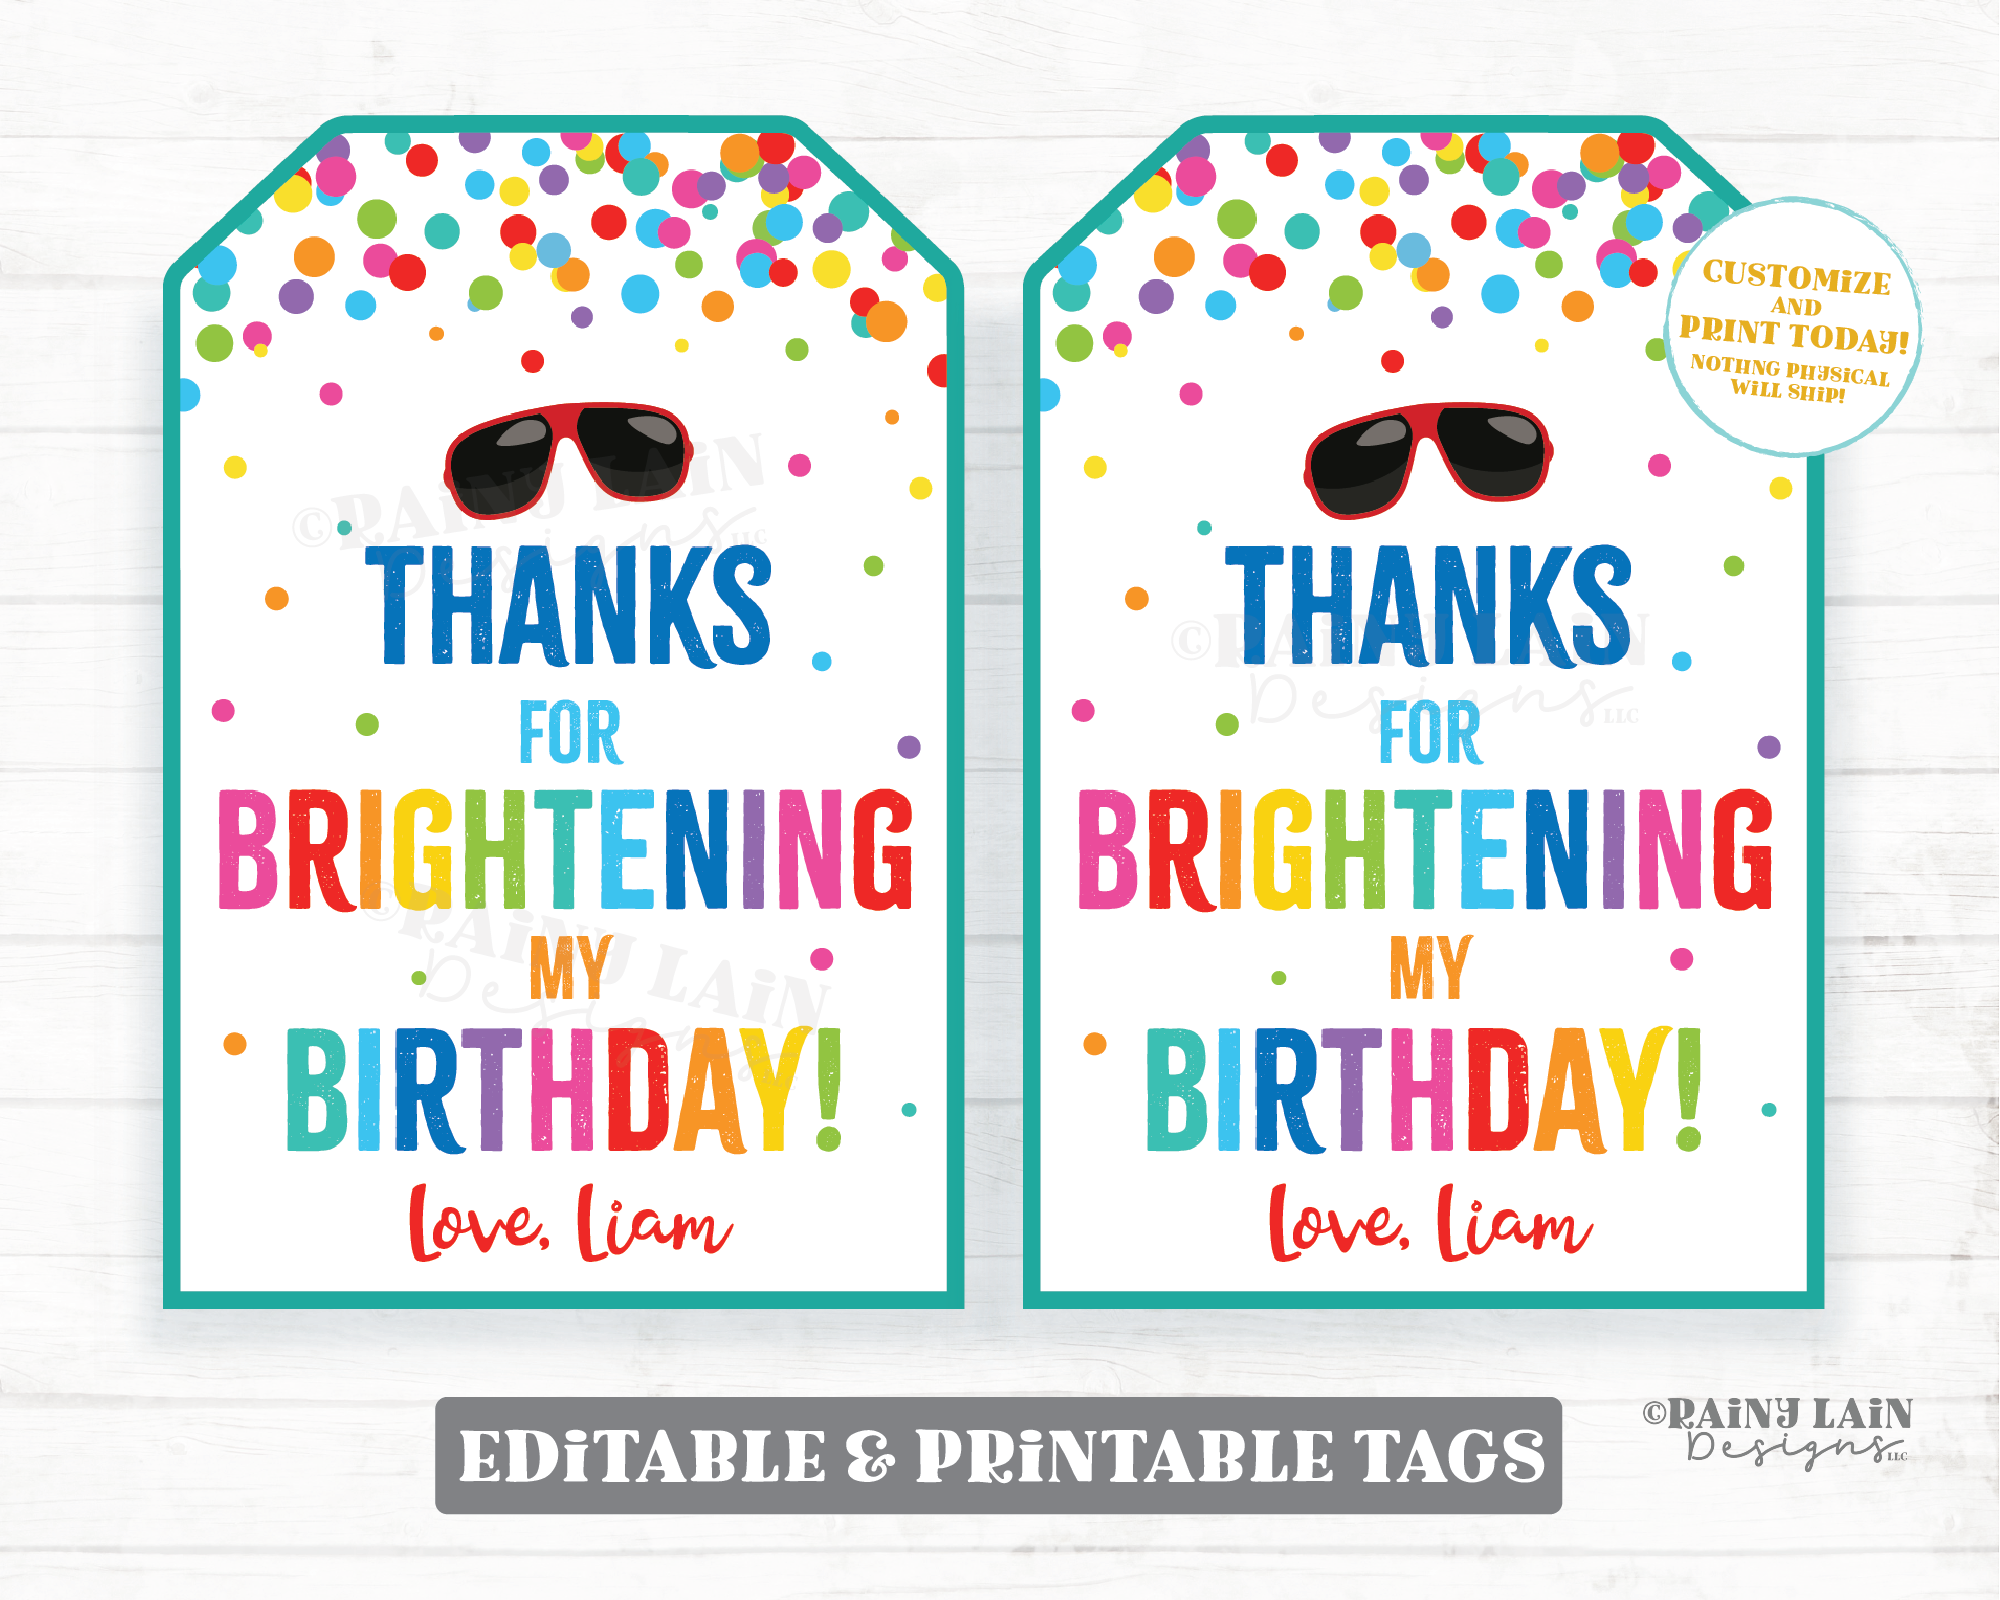 Thanks for Brightening My Birthday Tag Sunglasses Tags Sun Summer Bright Birthday Brighten School Party Favor Birthday Gift Party Light